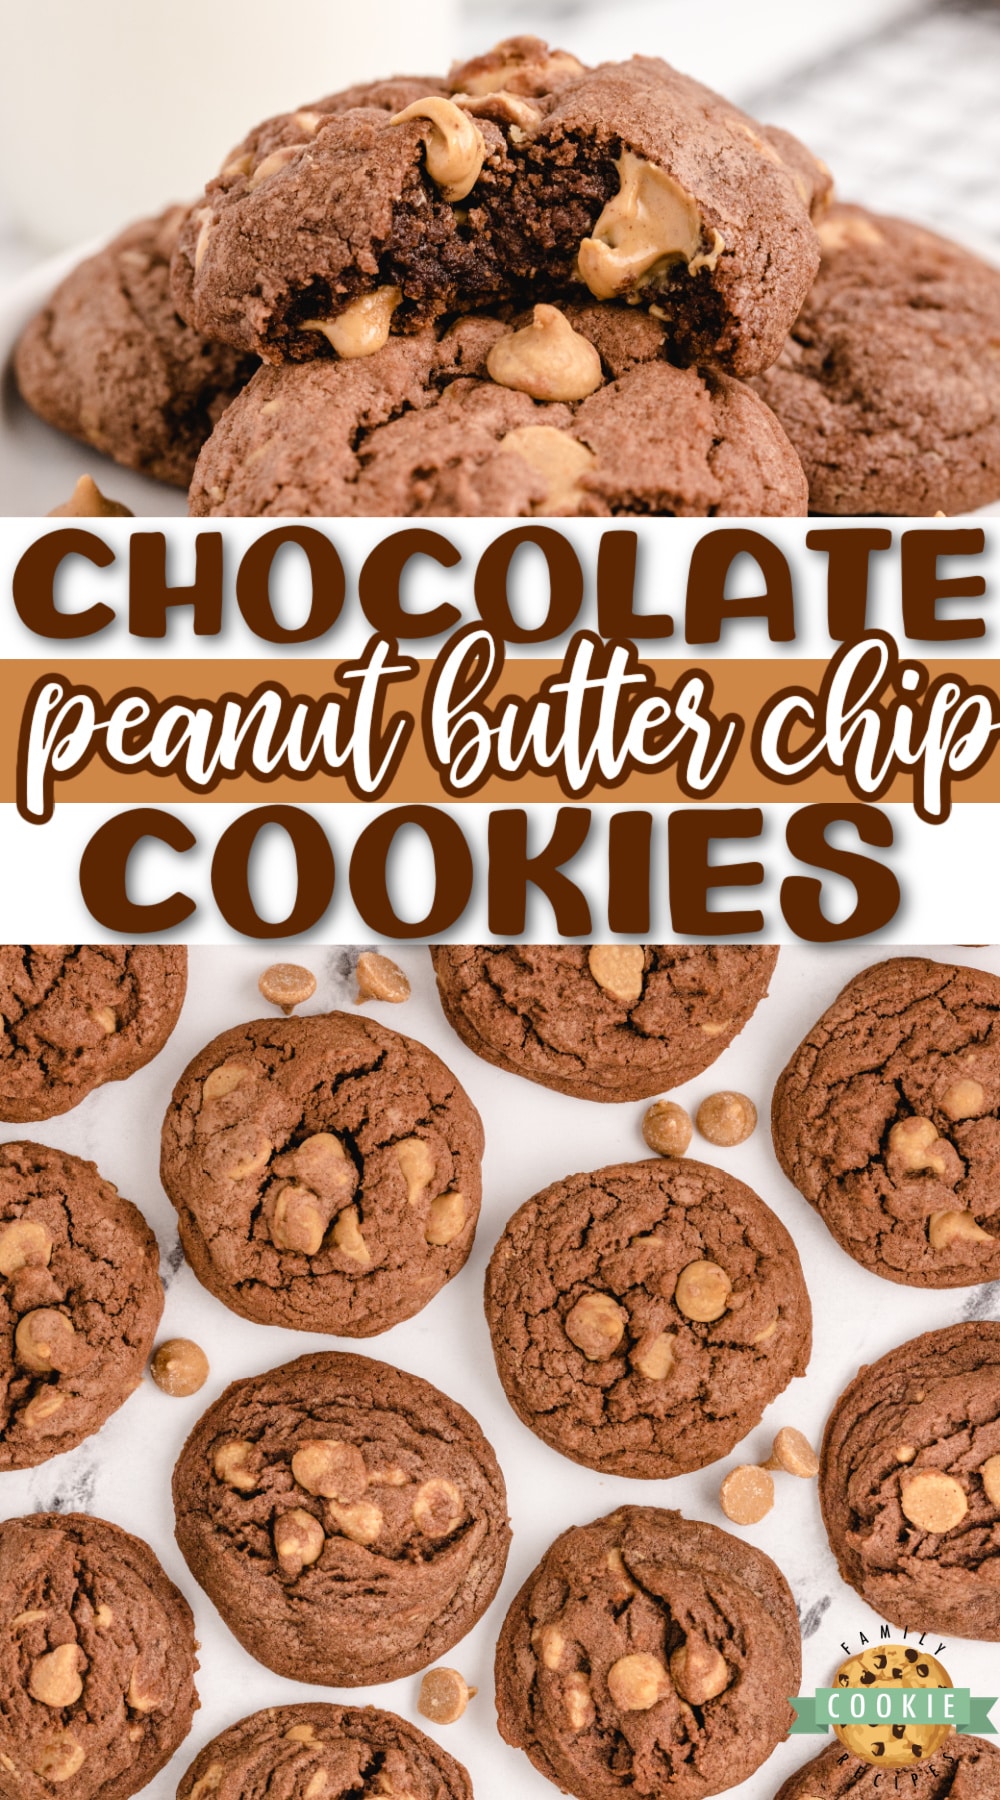 Chocolate Peanut Butter Chip Cookies made with chocolate pudding mix for a soft and chewy cookie that is loaded with chocolate flavor and Reese's peanut butter chips. via @buttergirls